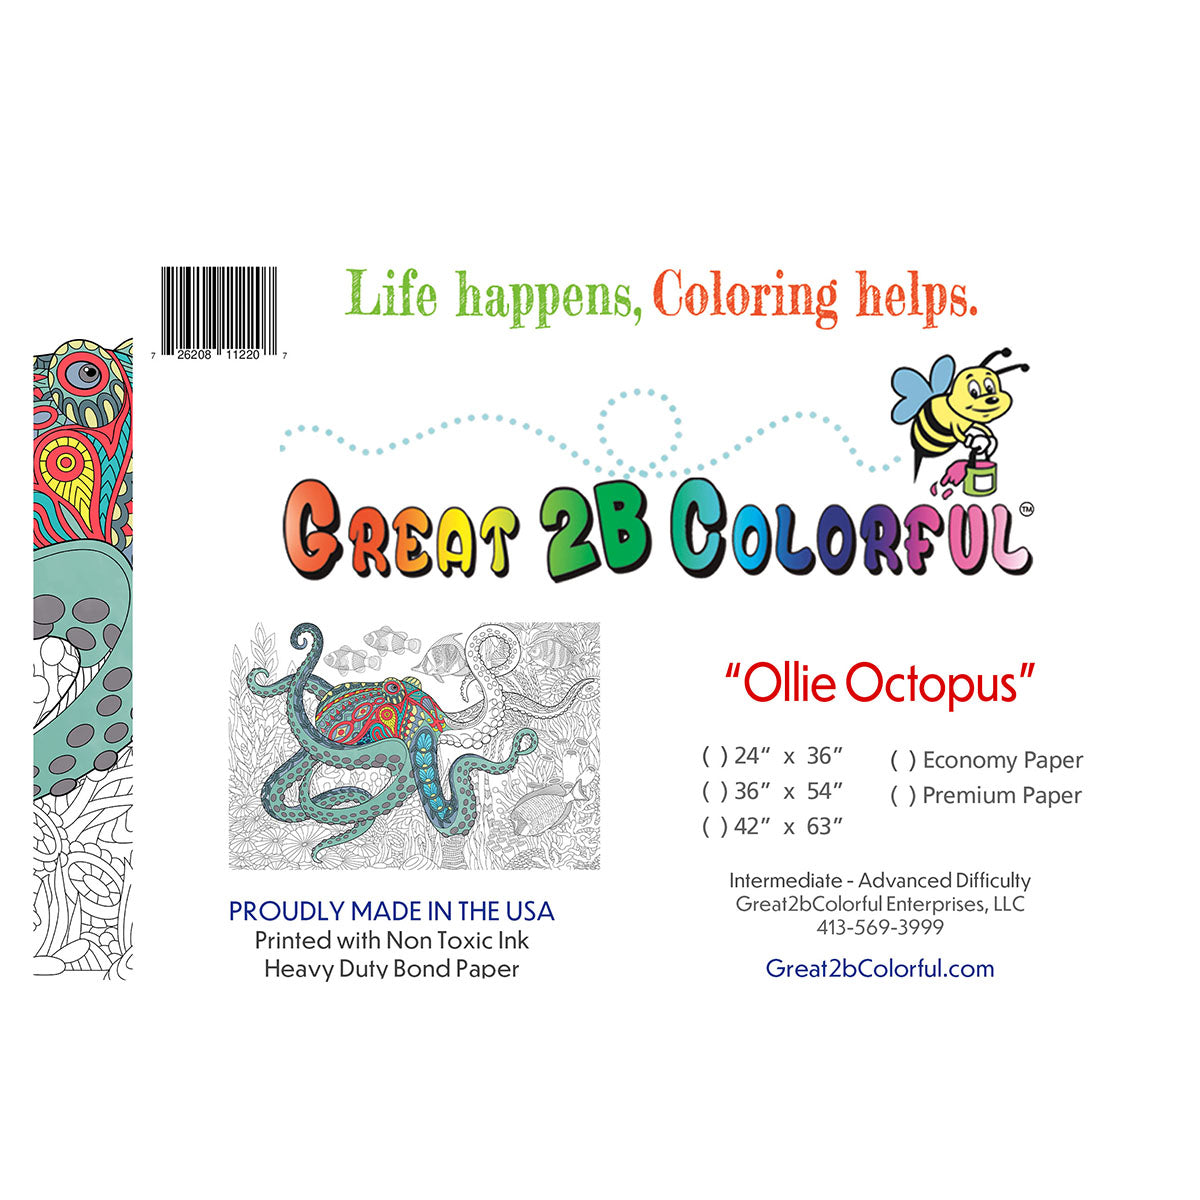 Great2bColorful - "Ollie Octopus" Coloring Poster